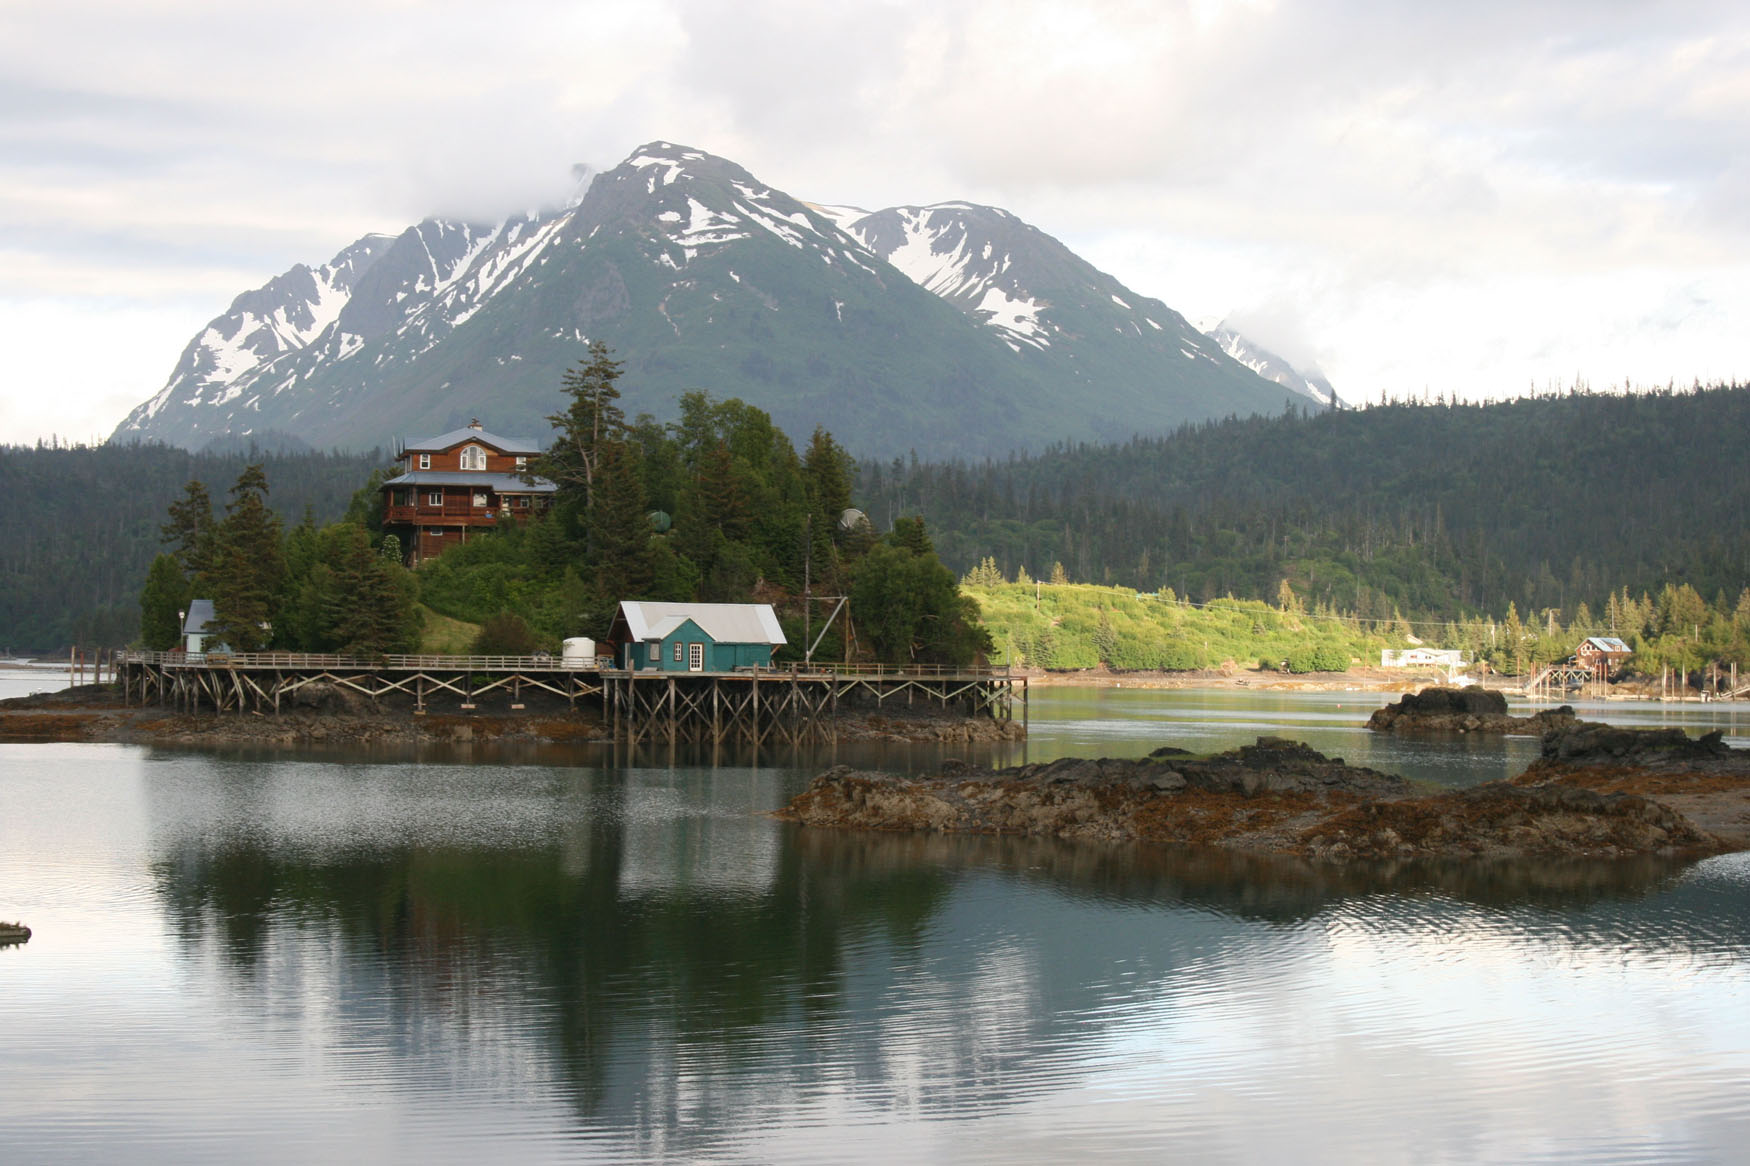 Several oyster farms operate in Halibut Cove, across Kachemak Bay from Homer. Many see shellfish farming as a way to reinforce the economies of small coastal communities, like Halibut Cove.-Photo by Saira Bradner